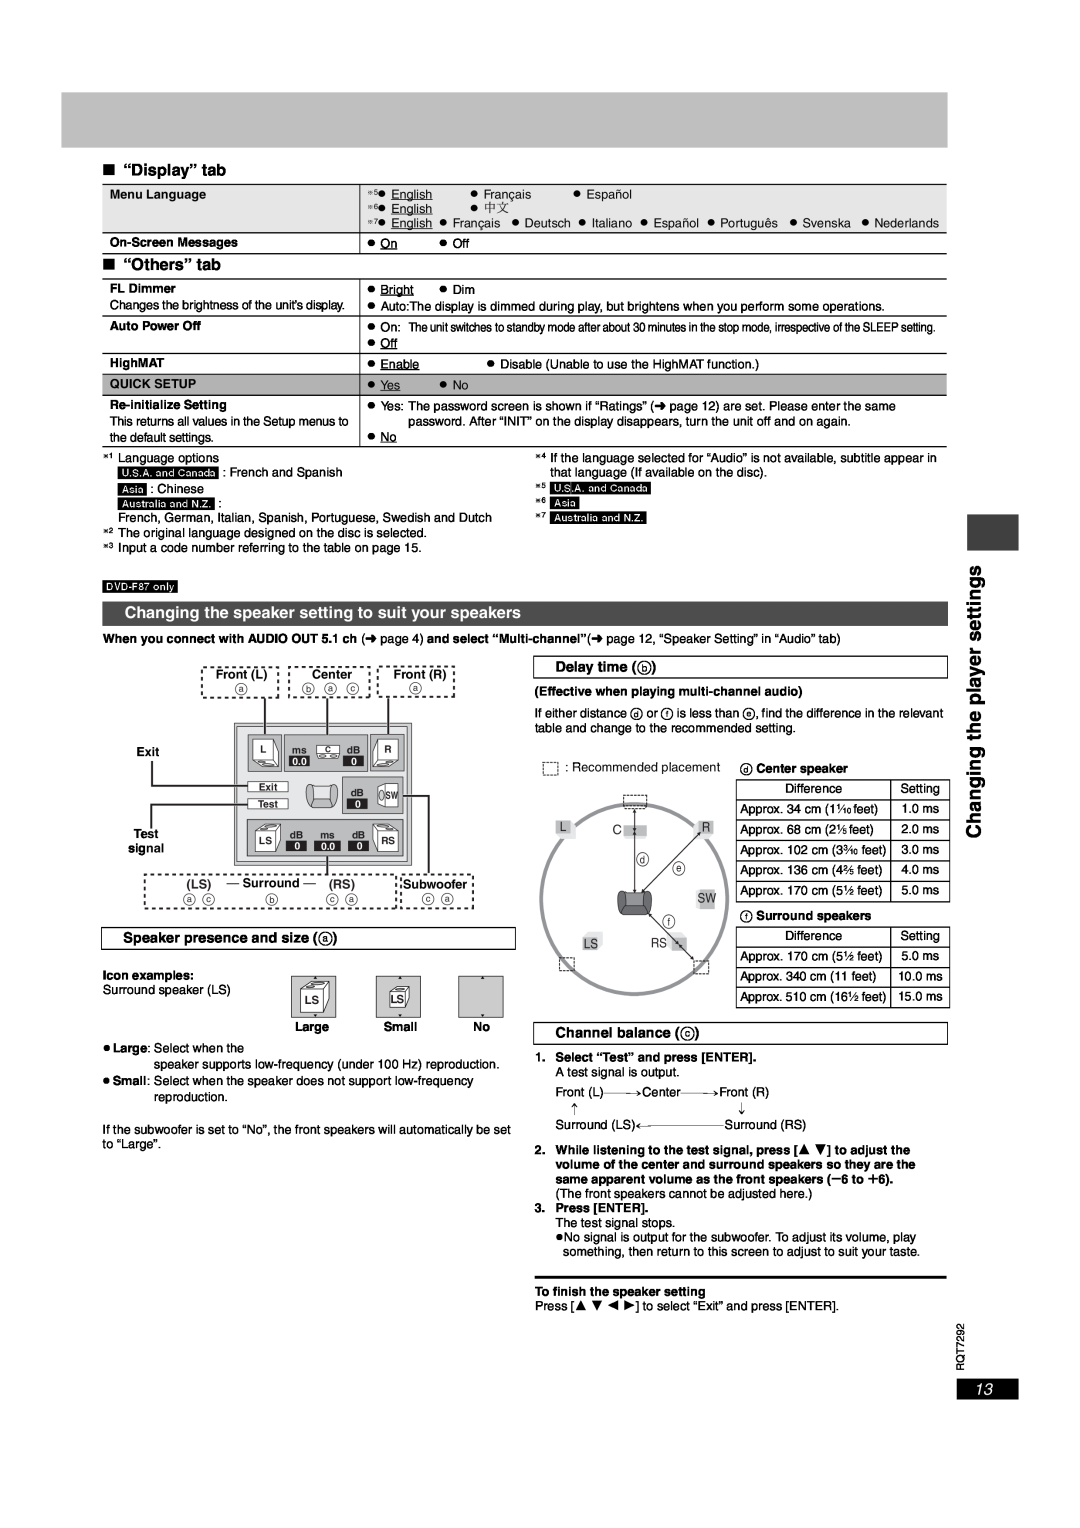 Panasonic DVD-F84 settings, Changing the speaker setting to suit your speakers, ≥ On, ≥ No, L C R, Ls Rs, b a c 